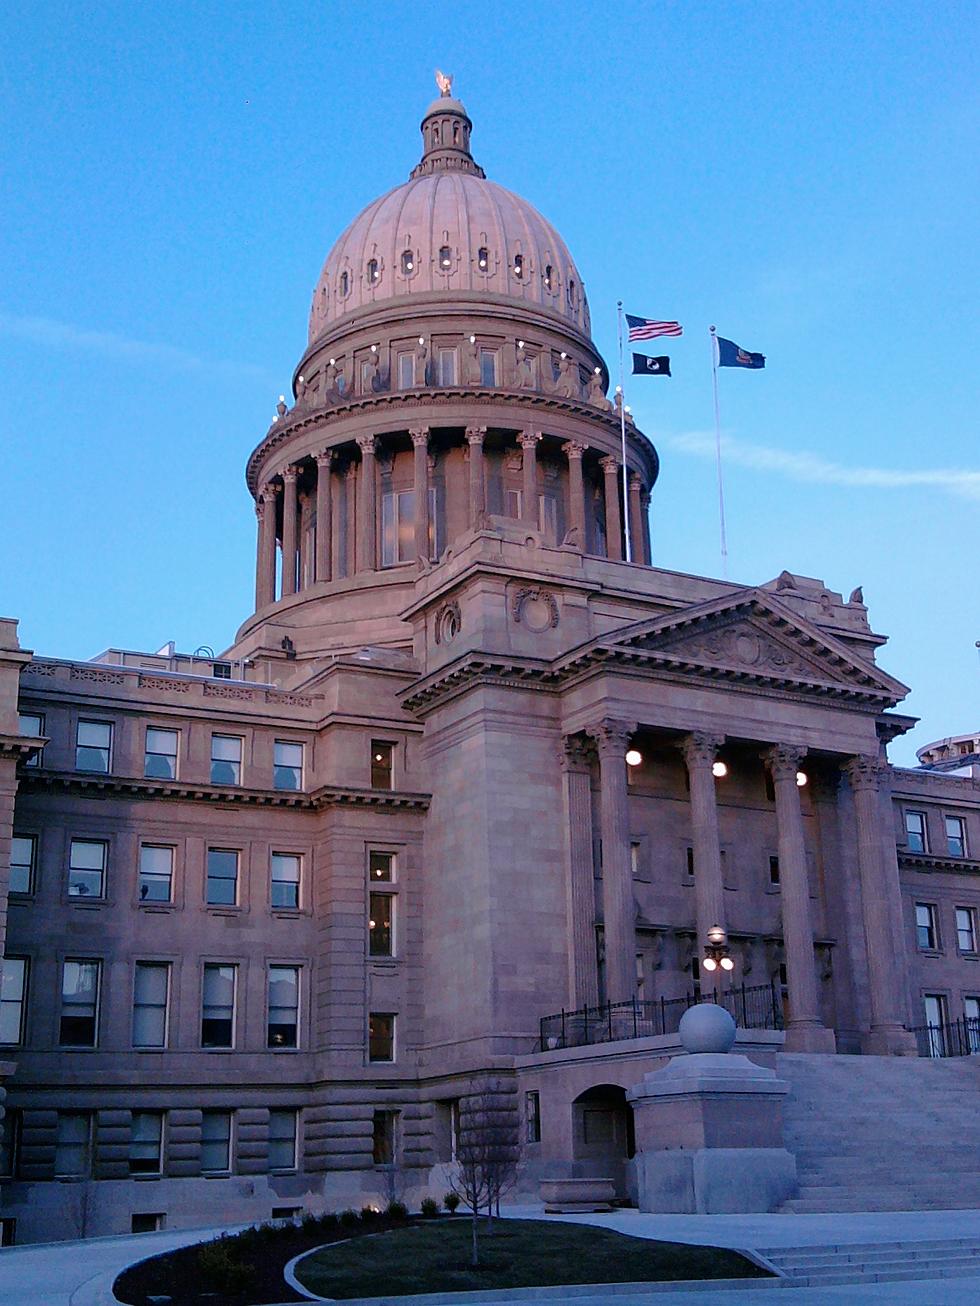 Woman Charged with Felony for Defacing Idaho Capital